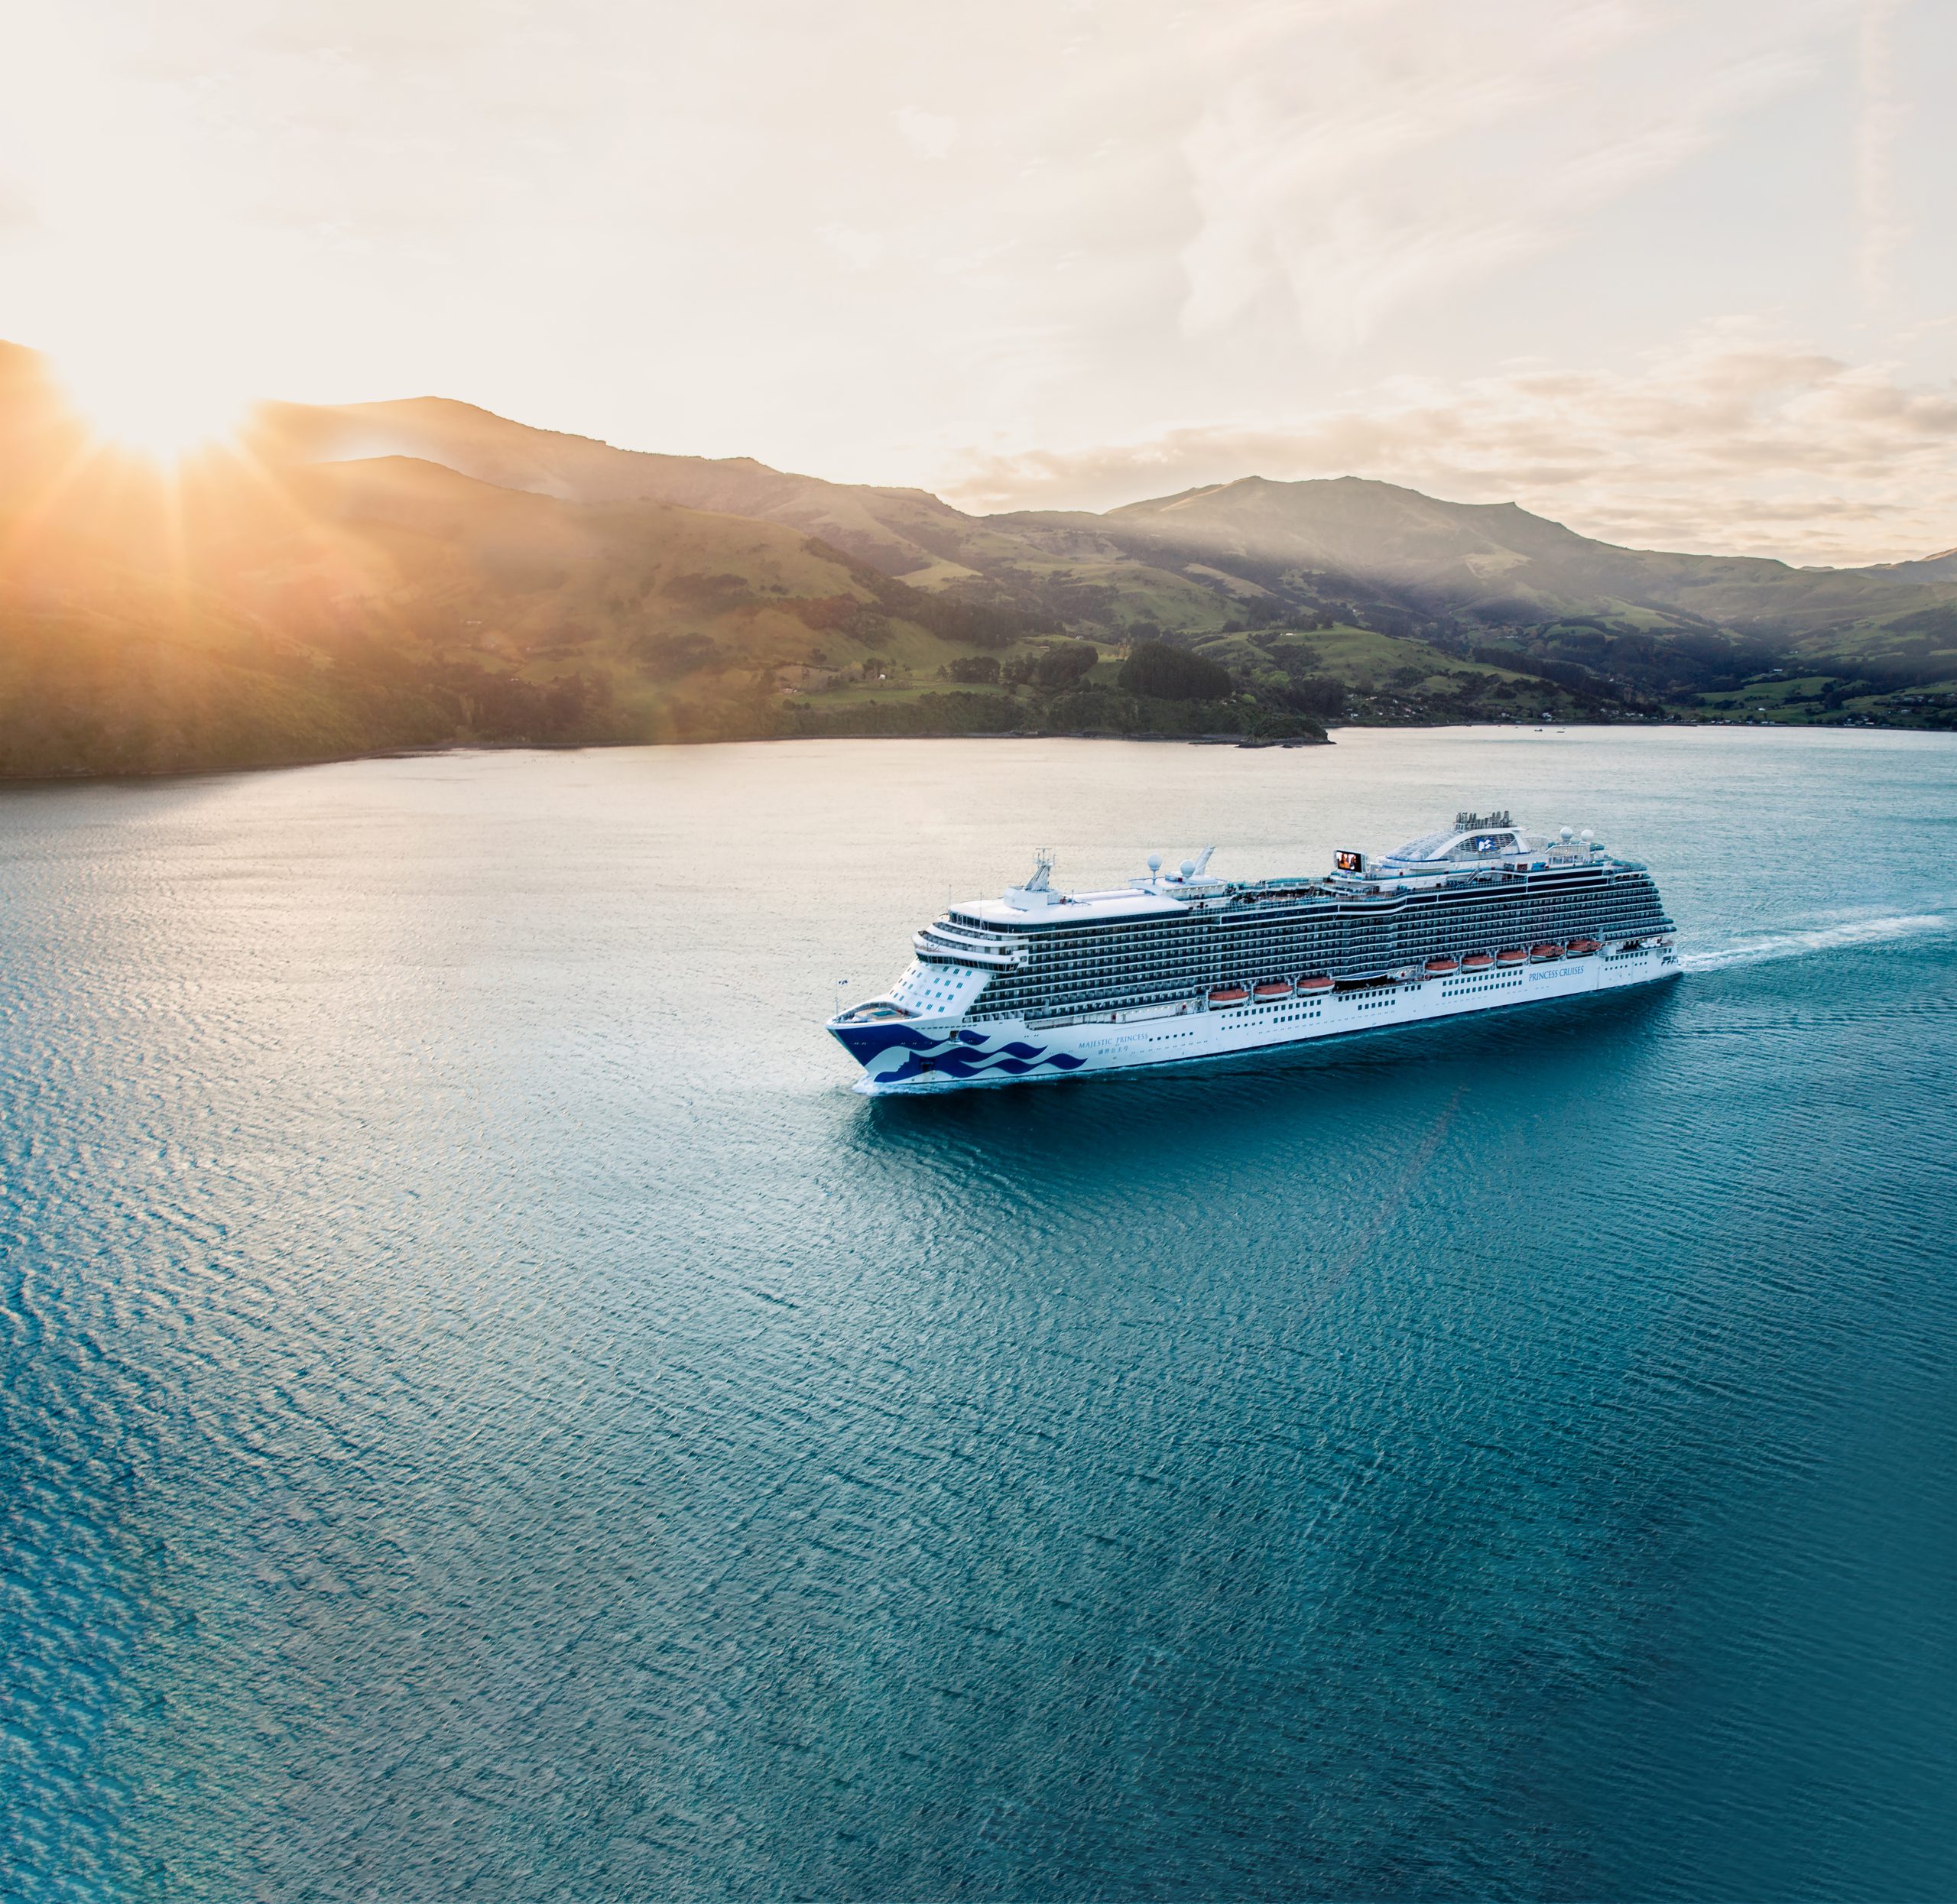 Princess Cruises returns to New Zealand with a host of new experiences